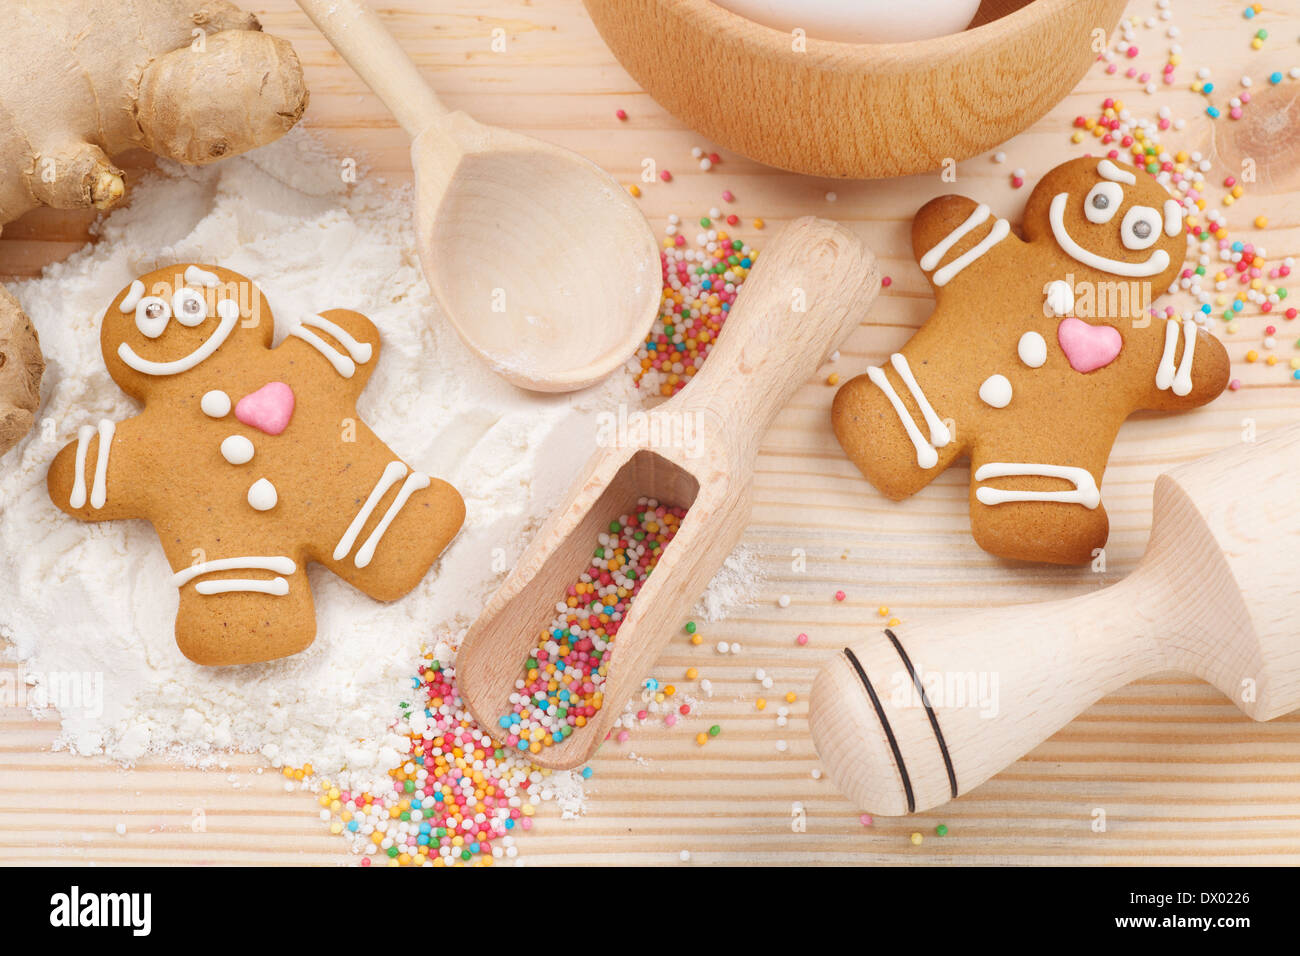 funny gingerbread men, flour, rolling pin, spoon and ginger on kitchen table Stock Photo